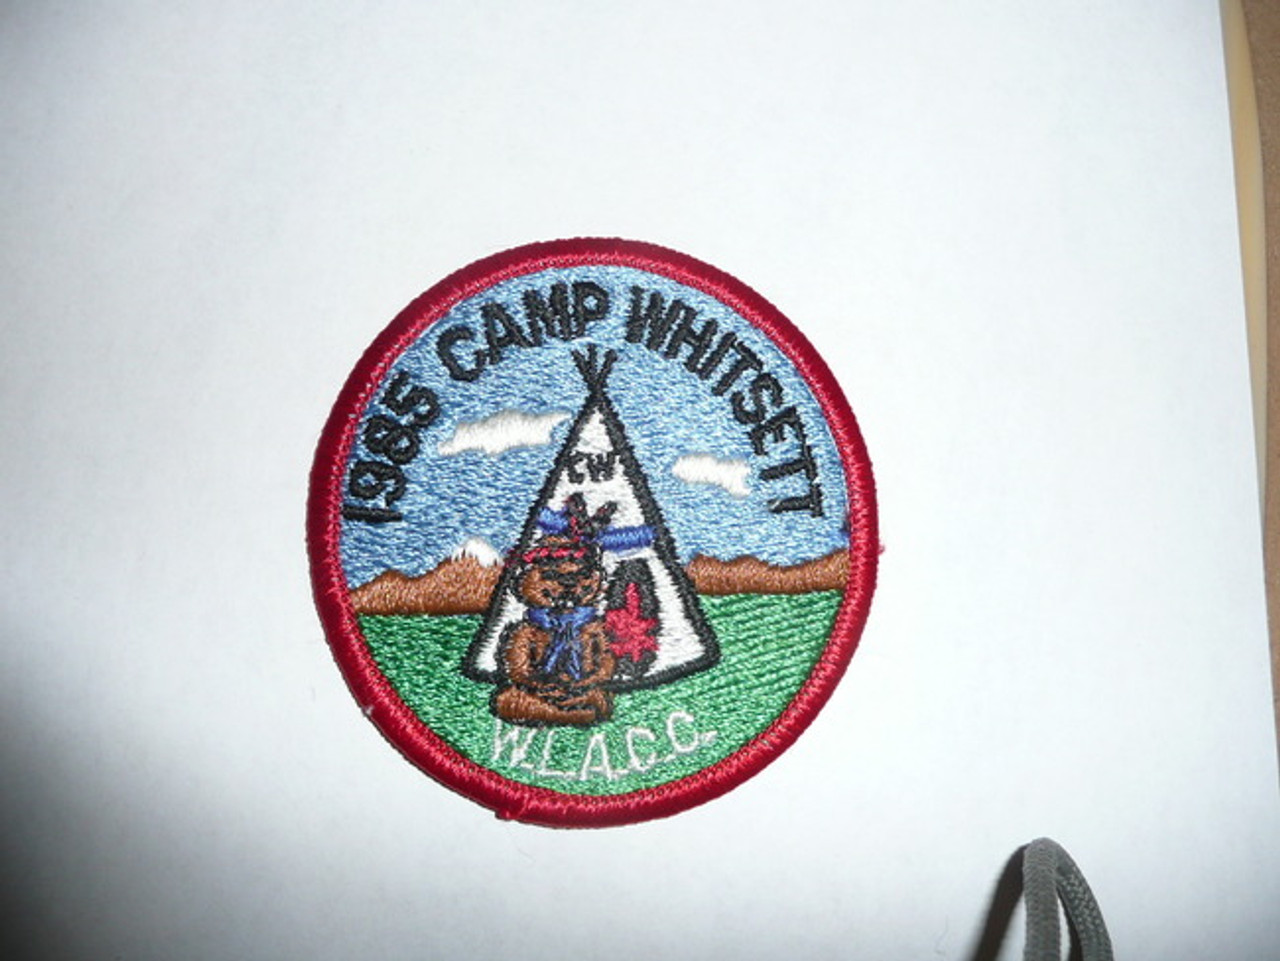 1985 Camp Whitsett Patch - Scout